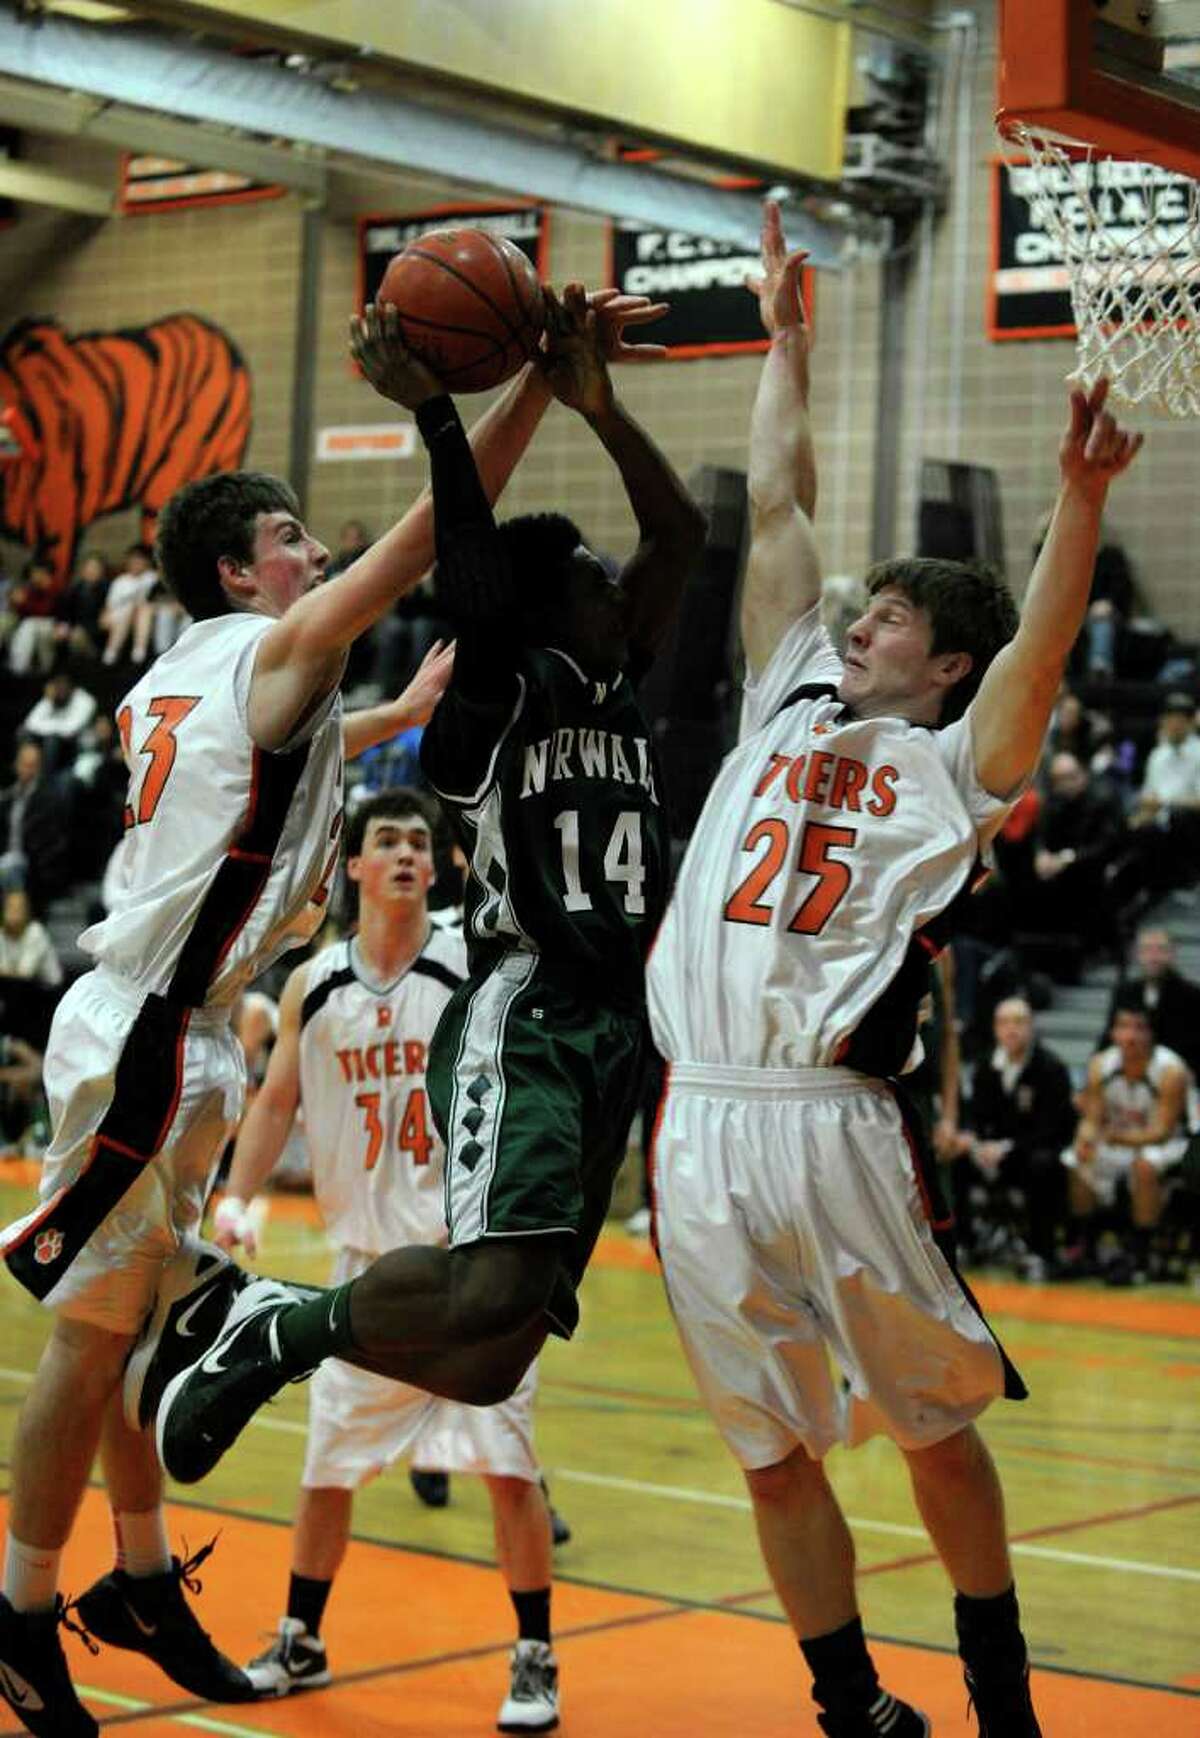 Norwalk's Jabari Dear drives to the basket while under pressure from Ridgefield's Patrick Racy, left, and Chipper McClelland during their game at Ridgefield High School on Friday, Jan. 6, 2012. Ridgefield won 60-40.